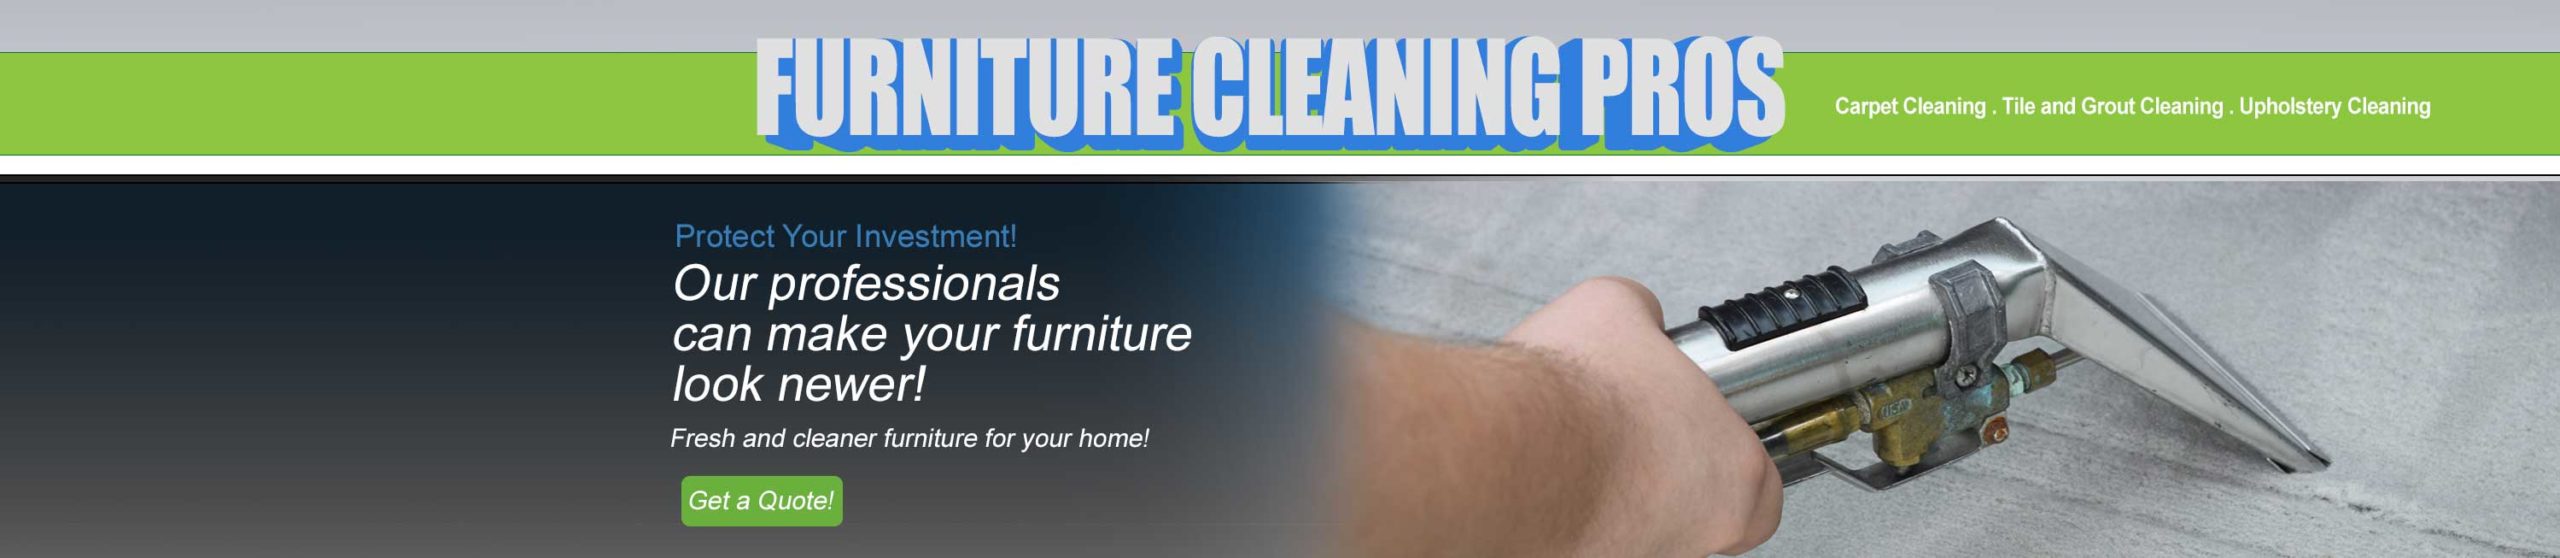 Furniture and upholstery cleaning in Apache Junction AZ